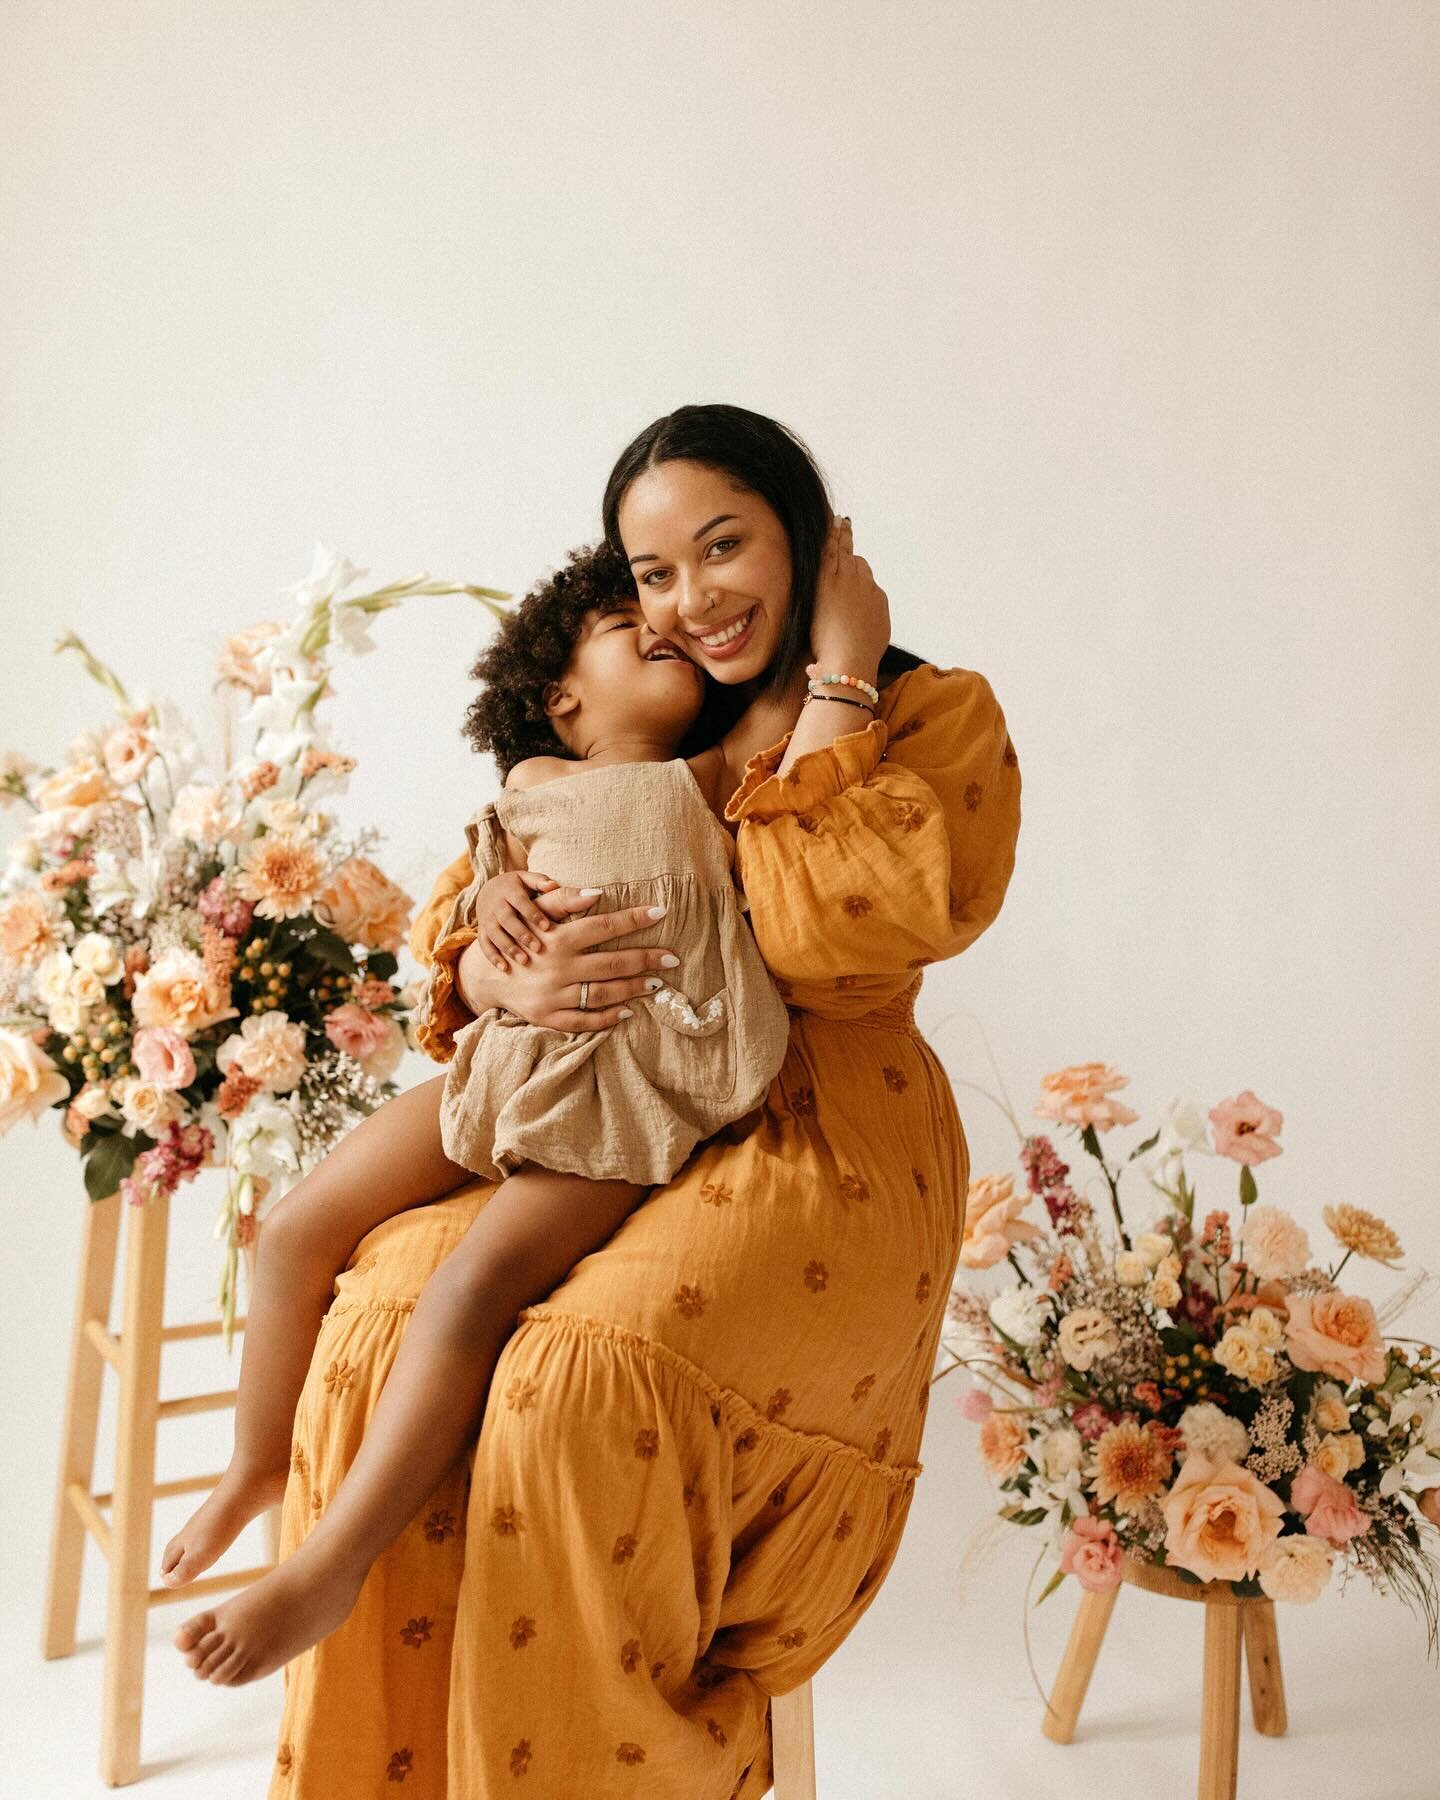 &ldquo;It&rsquo;s so healing to me
to watch my children 
be loved in ways
that I wasn&rsquo;t.&rdquo;
- @letters.to.anna 

Motherhood mini sessions are a pause. A celebration of the little everyday moments - the calm quiet strength mothers possess, t